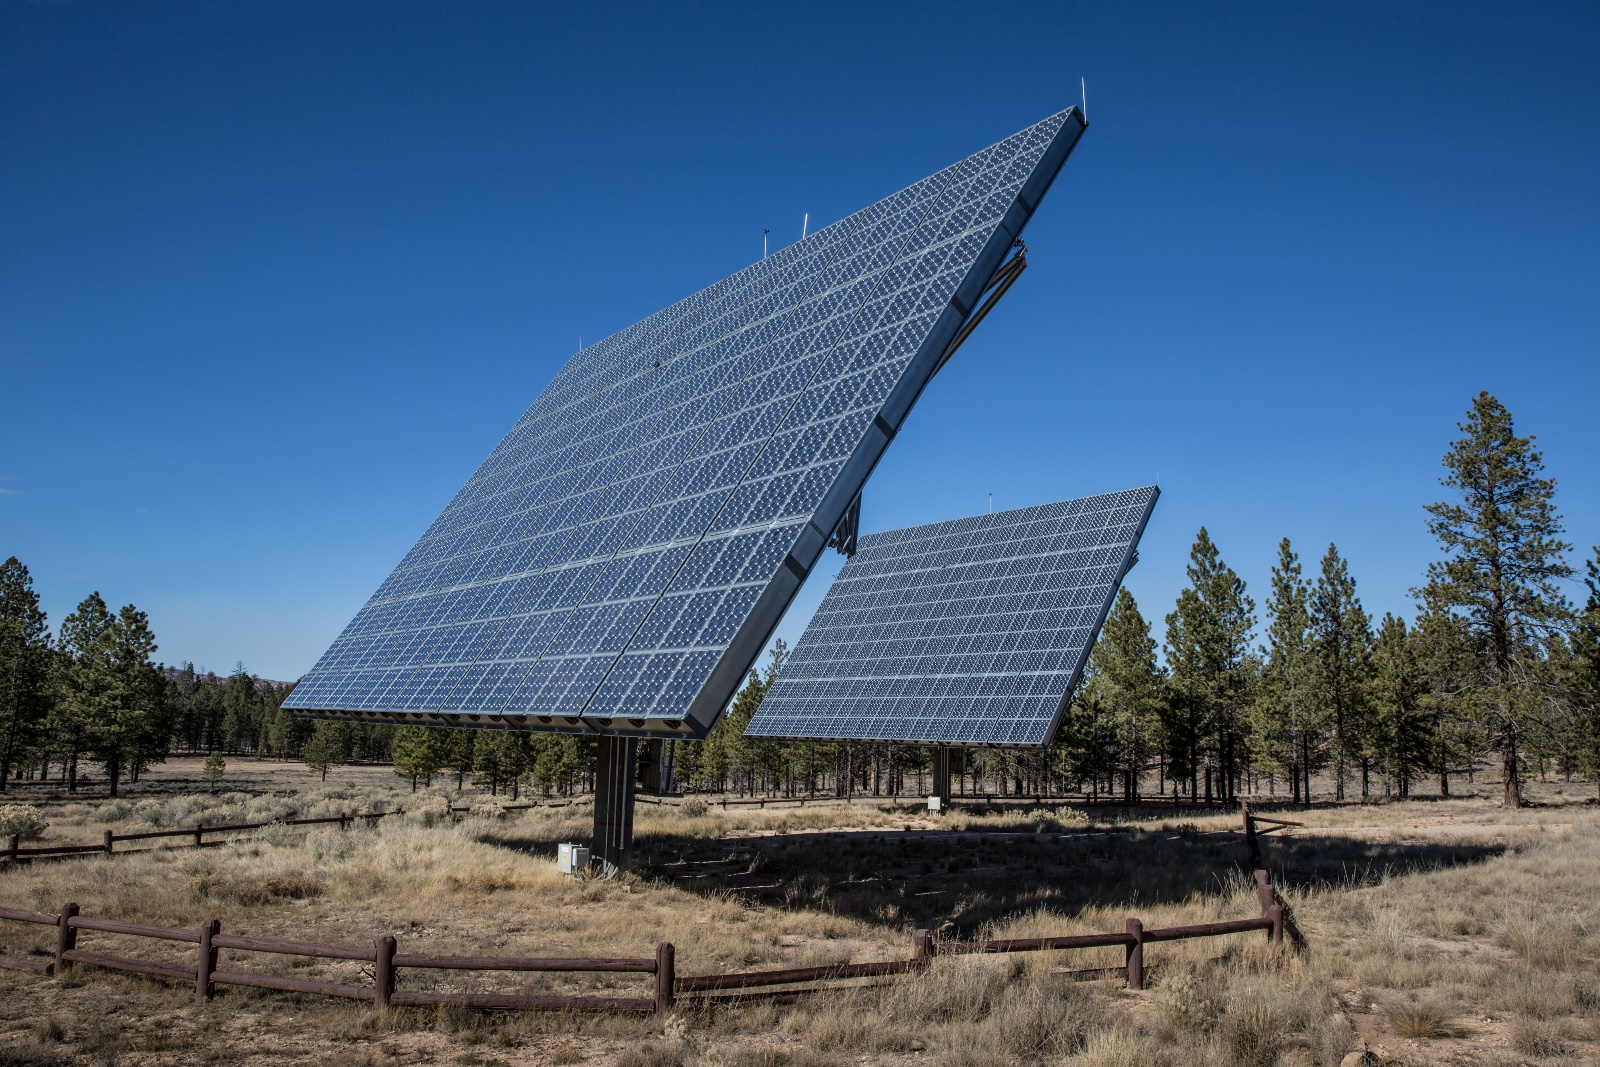 Two large solar panels are fenced in a dry, shrubby area.